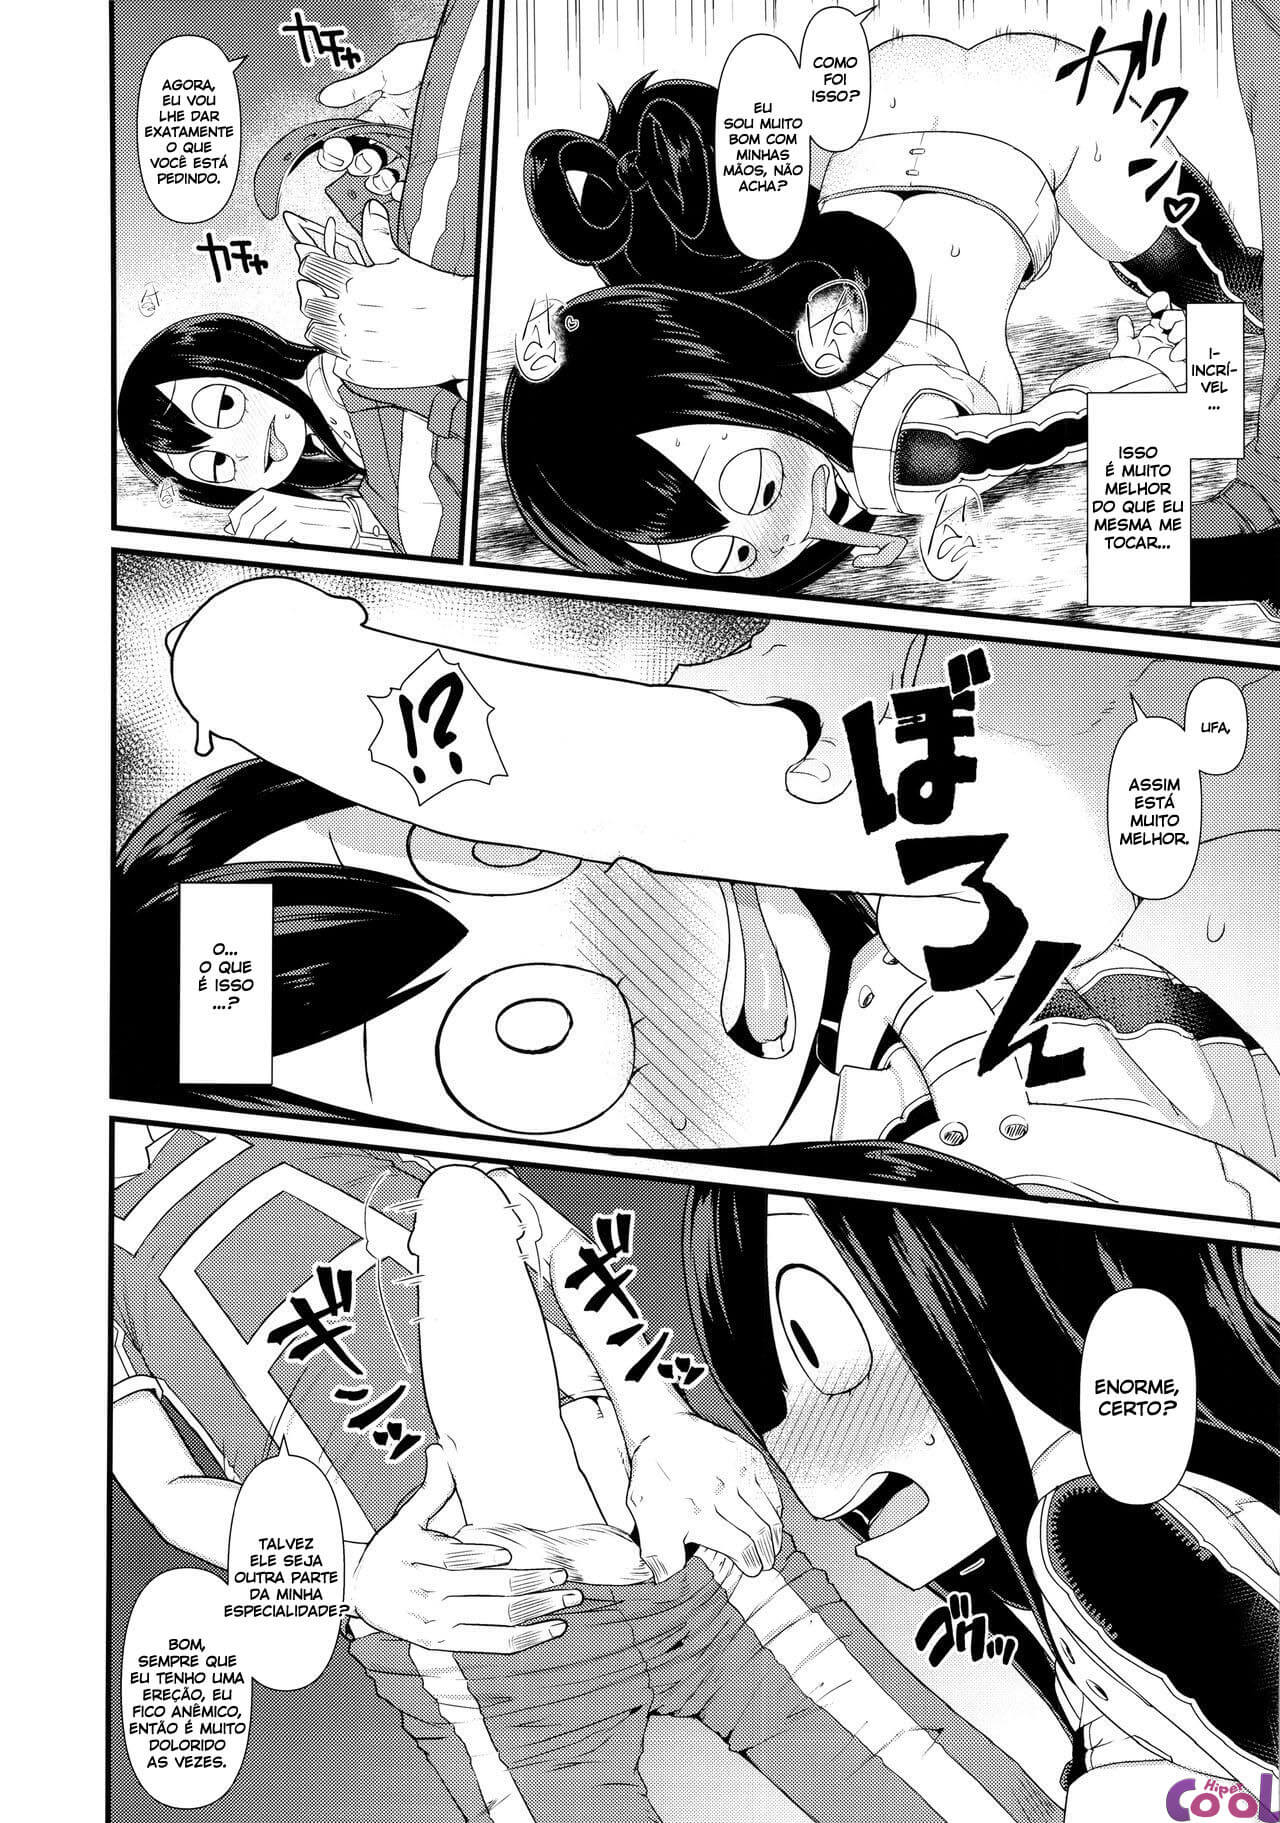 froppy-chapter-01-page-12.jpg